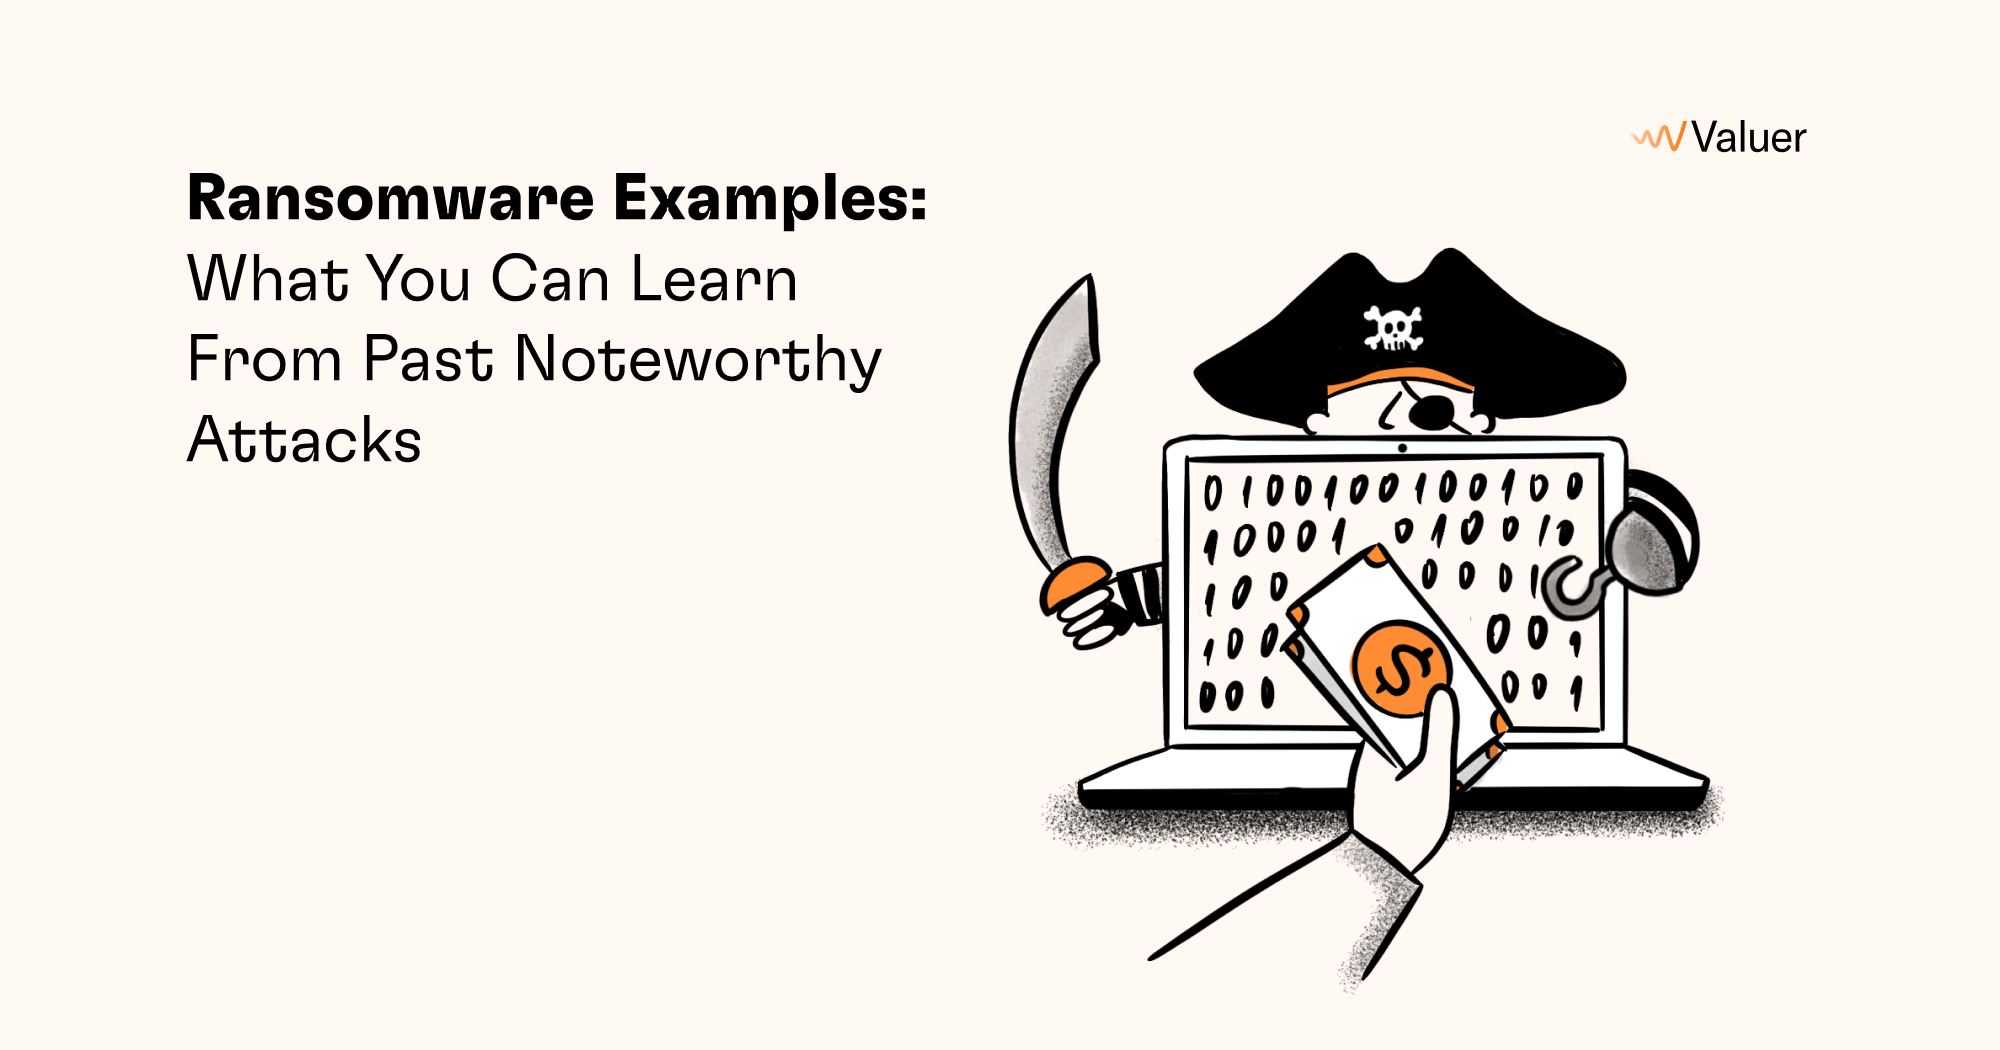 Ransomware Examples: What You Can Learn From Past Noteworthy Attacks